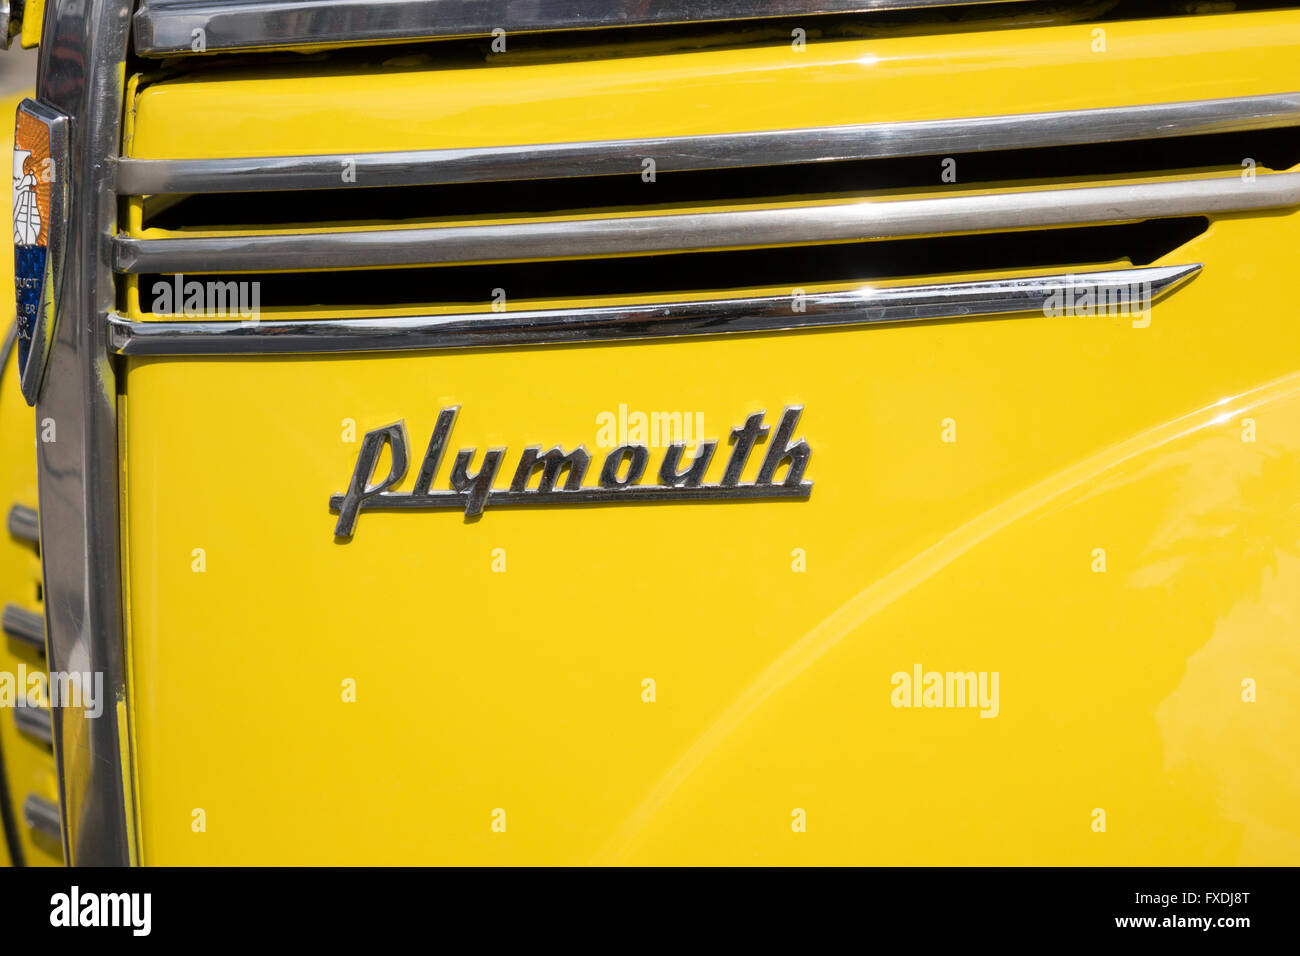 Close Up Of The Chrysler Plymouth Logo On A Vintage Nineteen Thirties Plymouth Automobile Stock Photo